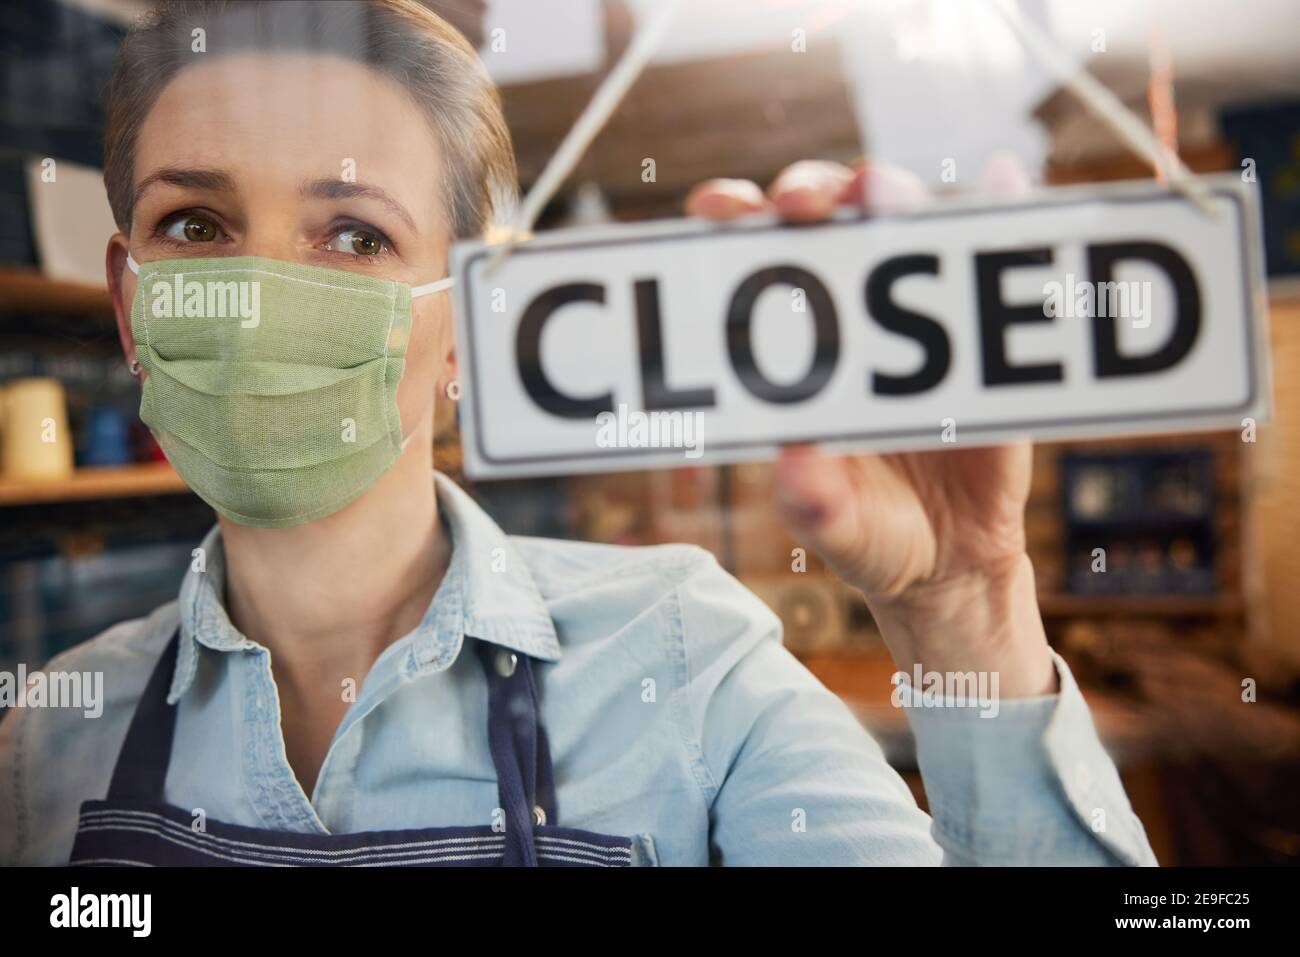 Female Owner Of Small Business Wearing Face Mask Turning Round Closed Sign During Health Pandemic Stock Photo